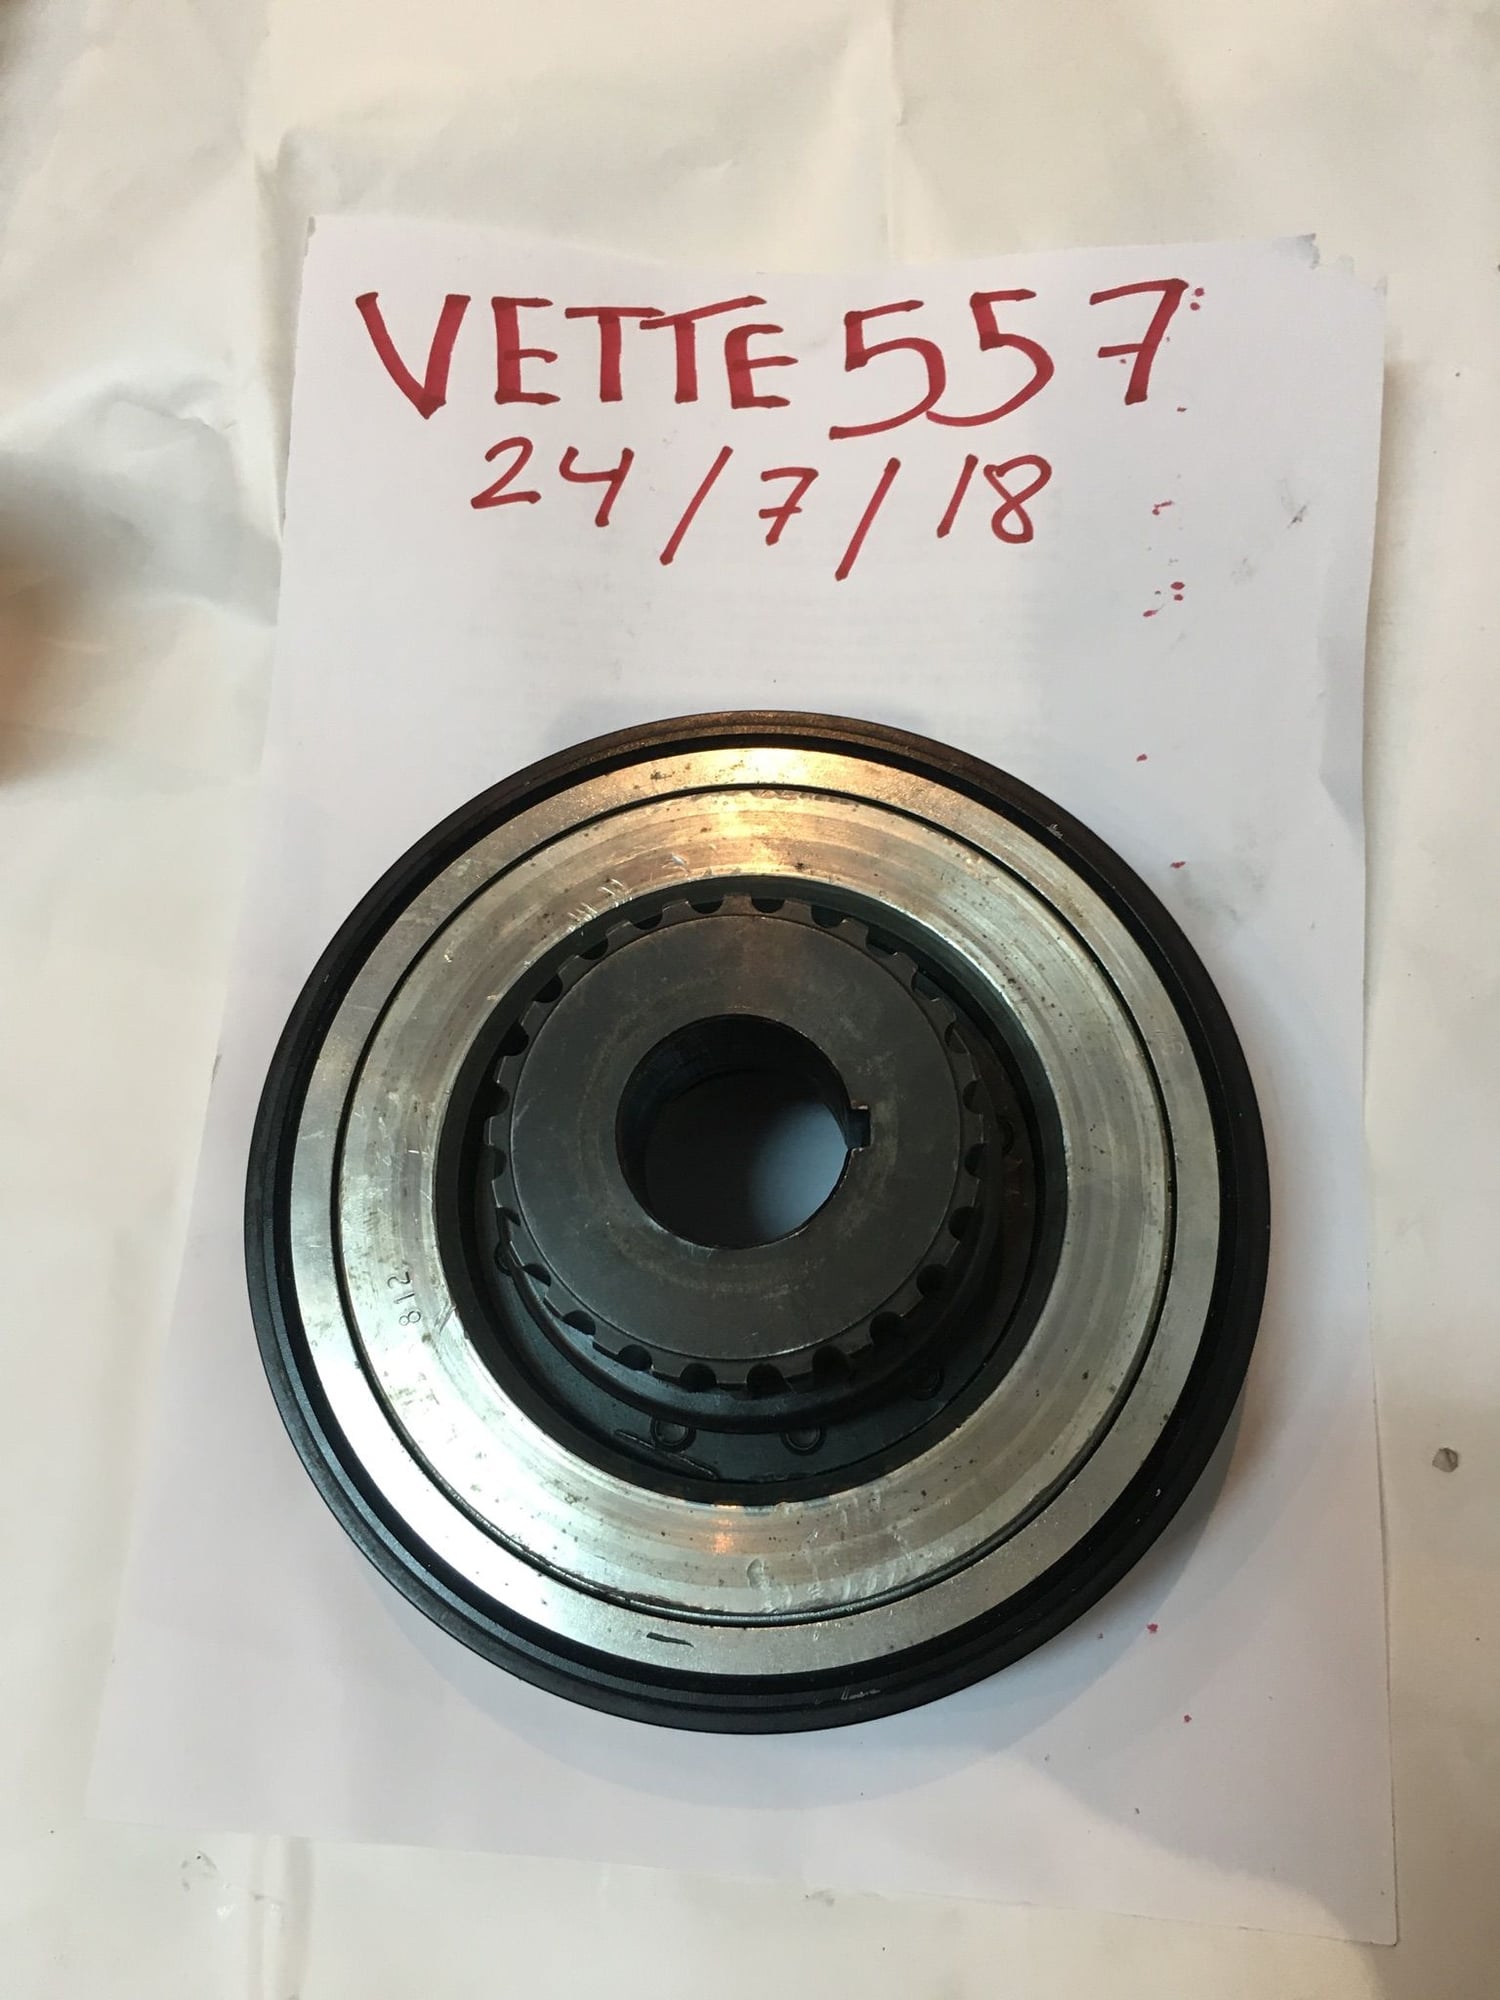 Engine - Power Adders - FS : ATI Super Damper Pulley - Used - 1996 to 2012 Mitsubishi Lancer Evolution - Springfield Gardens, NY 11413, United States